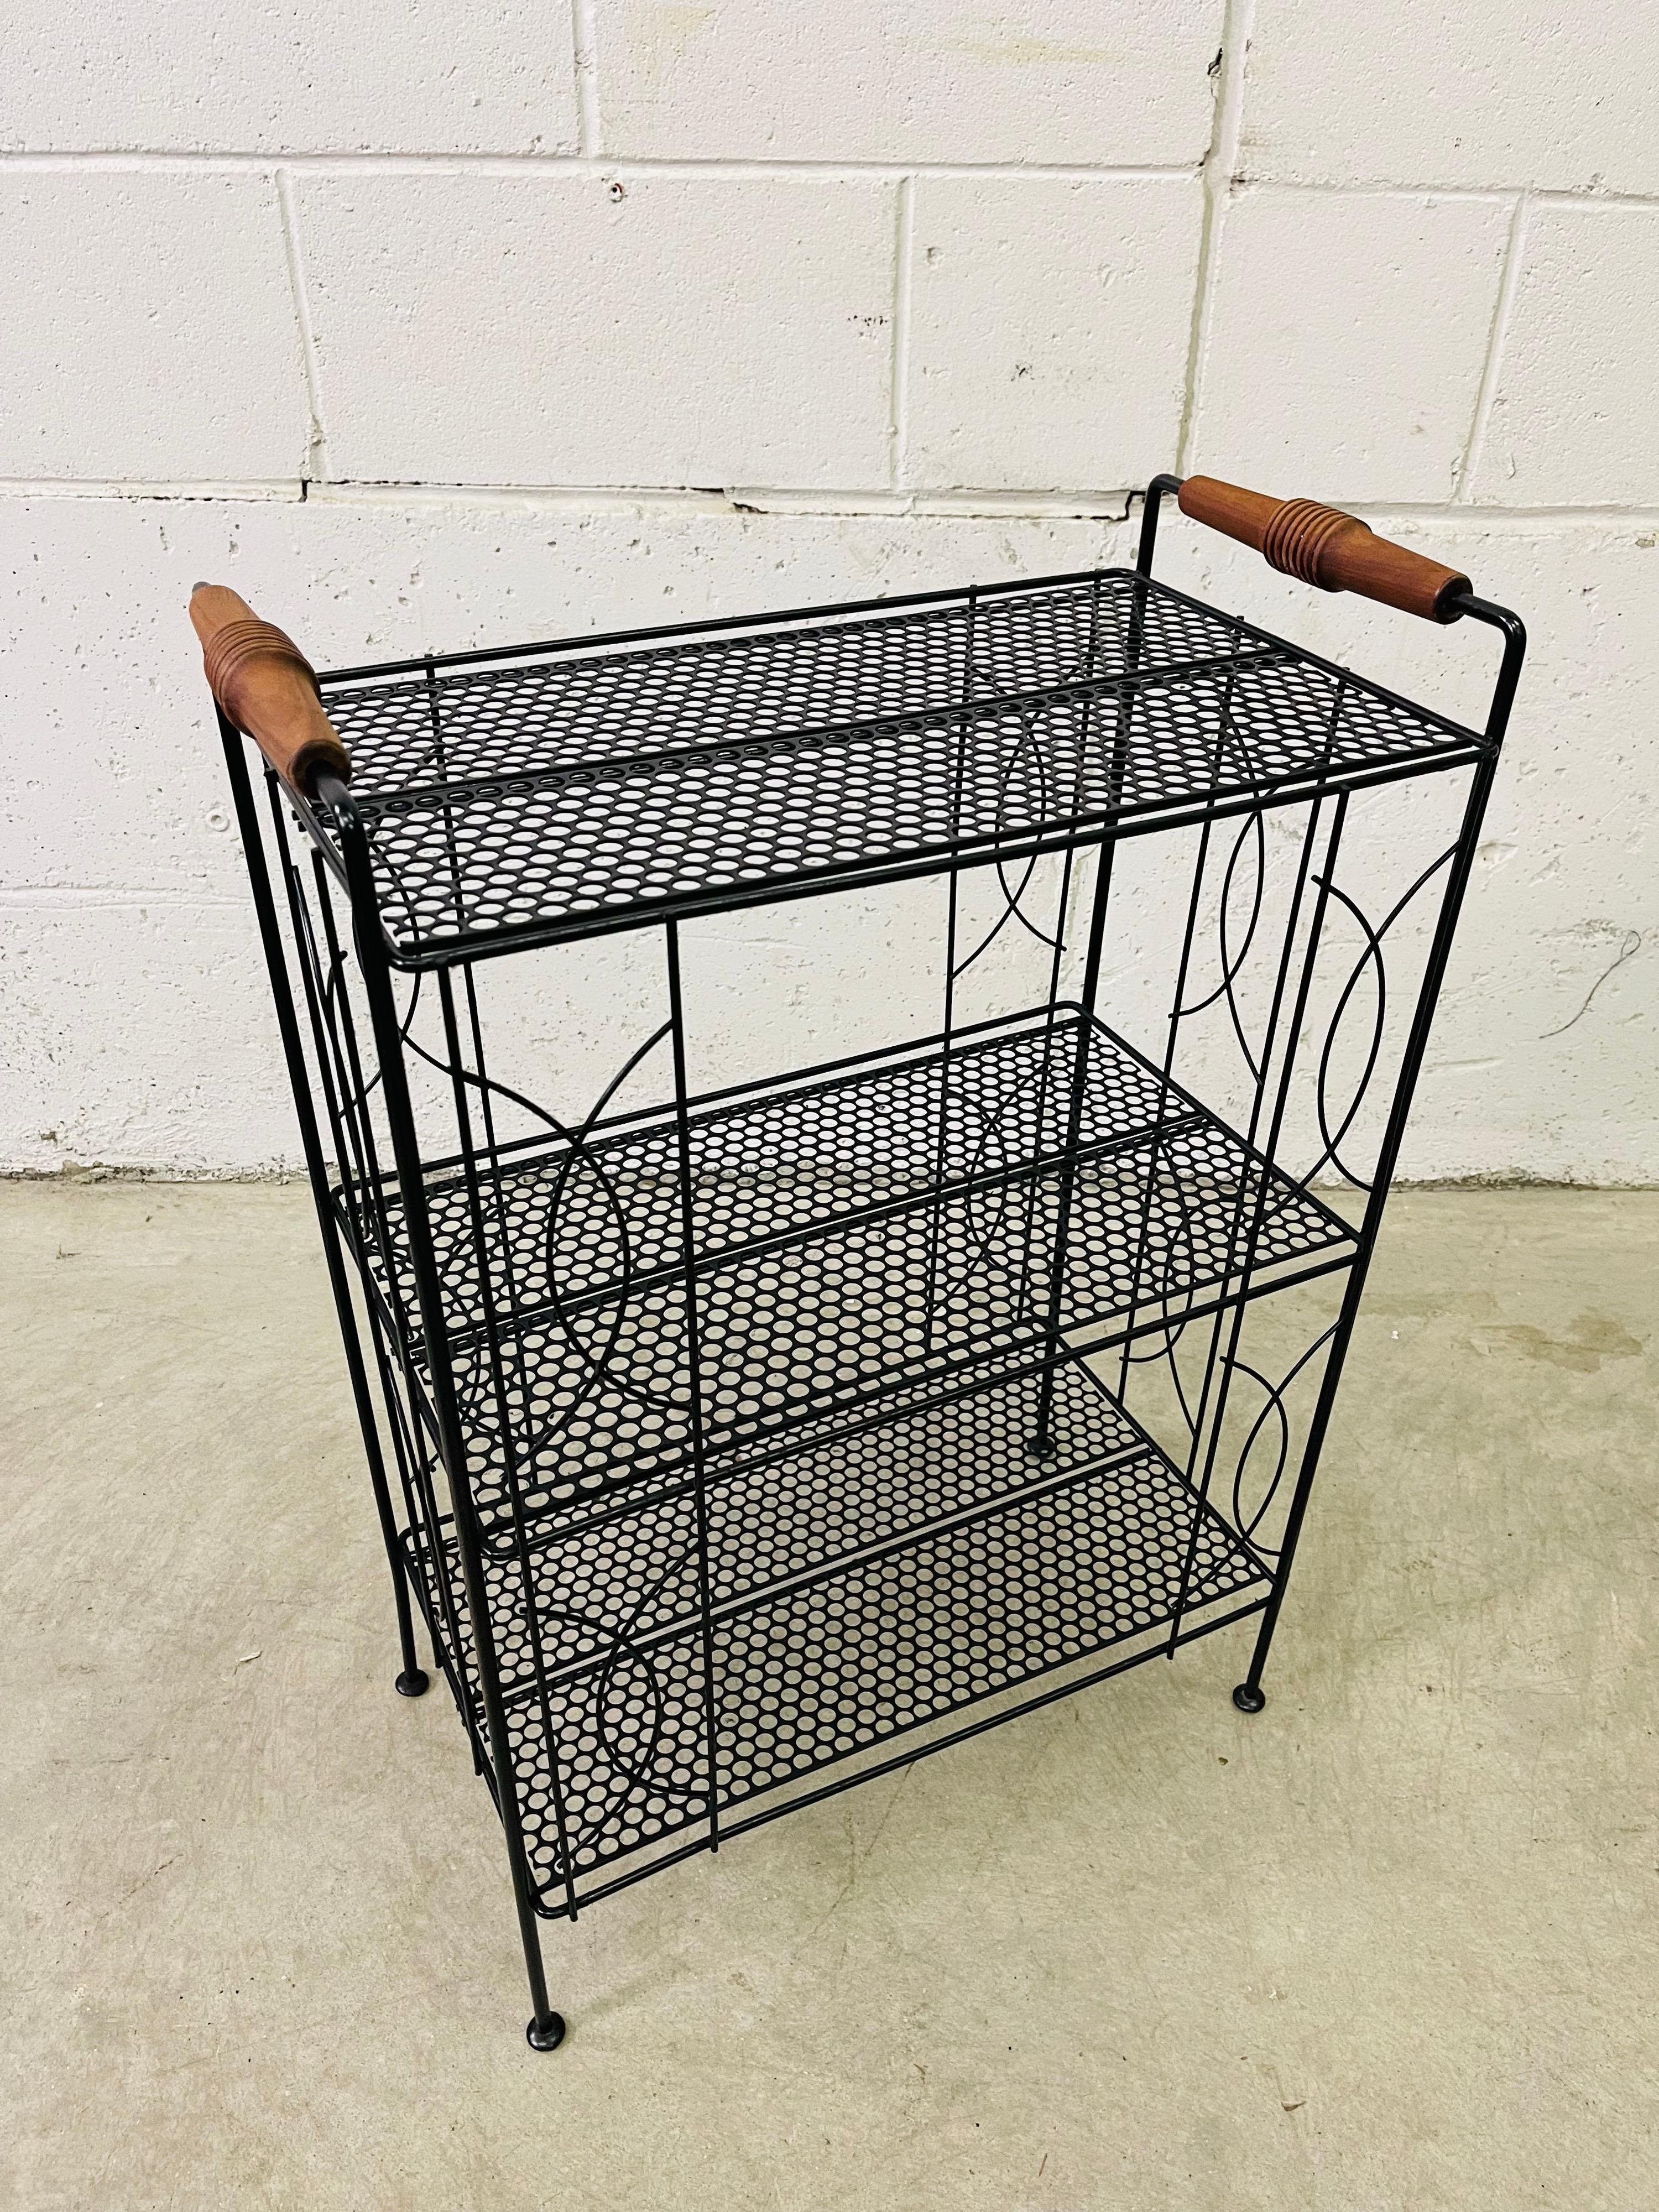 Vintage 1960s black metal storage shelf with walnut wood handles. The stand has three shelves for storage and nice decorative accents on the back and sides. No marks.